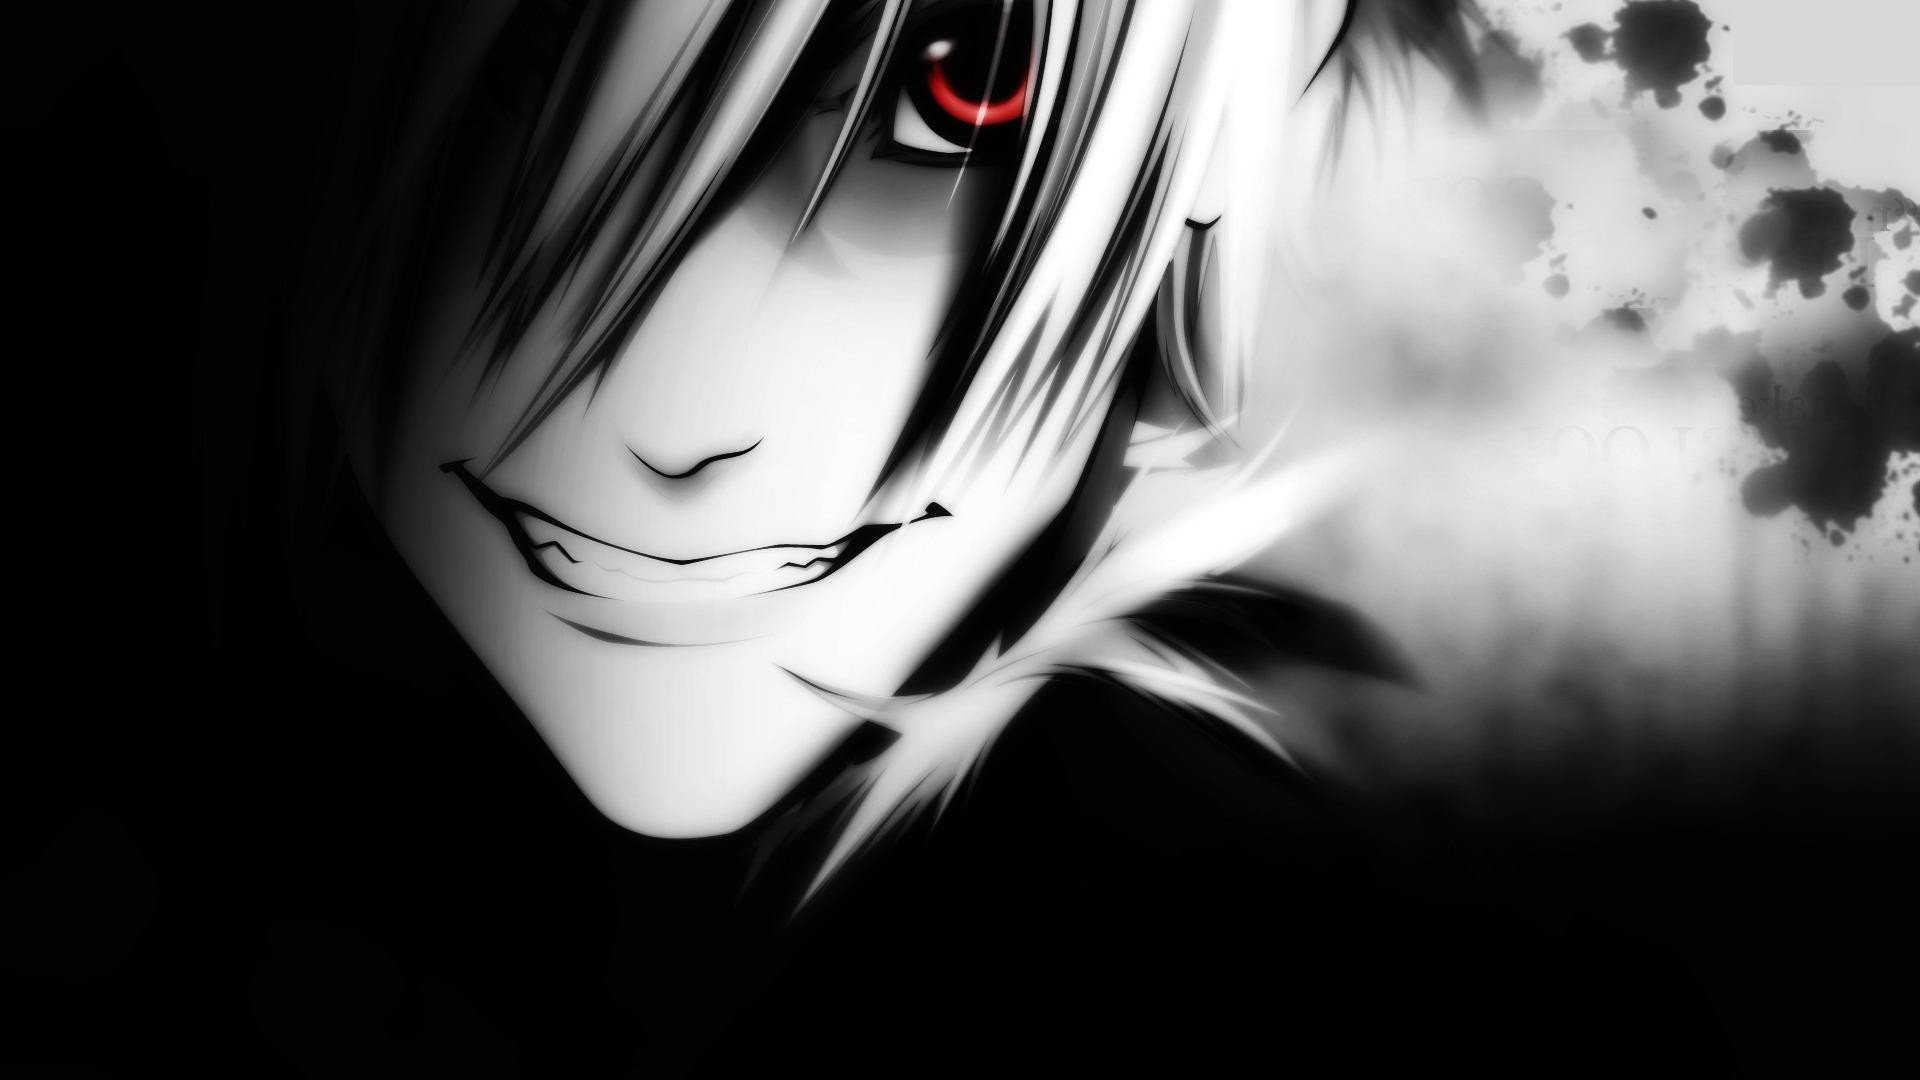 Death Note black and white red eyes anime wallpaper 1920x1080 1920x1080